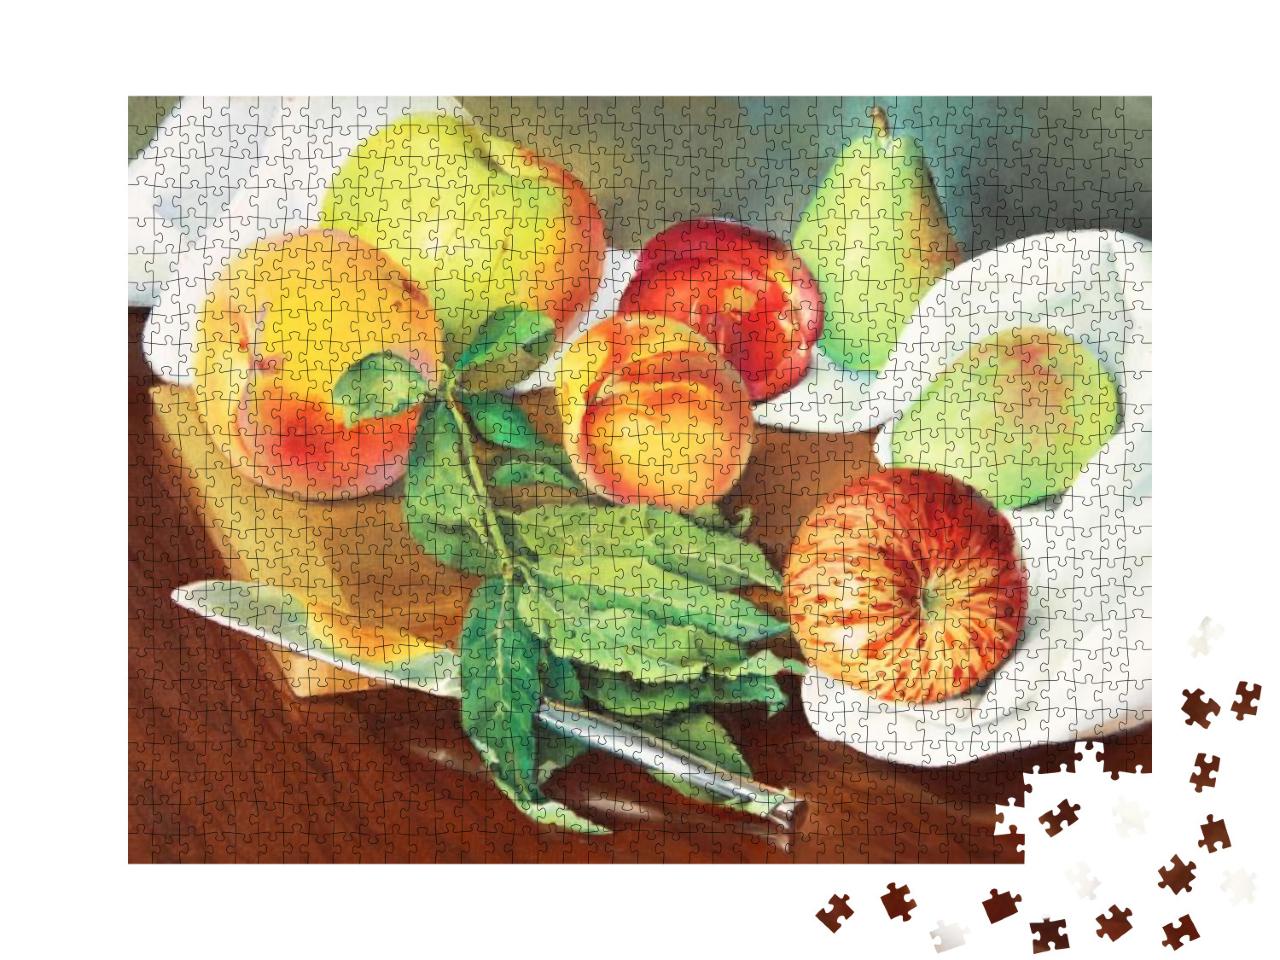 Peach & Apples Still Life Oil... Jigsaw Puzzle with 1000 pieces